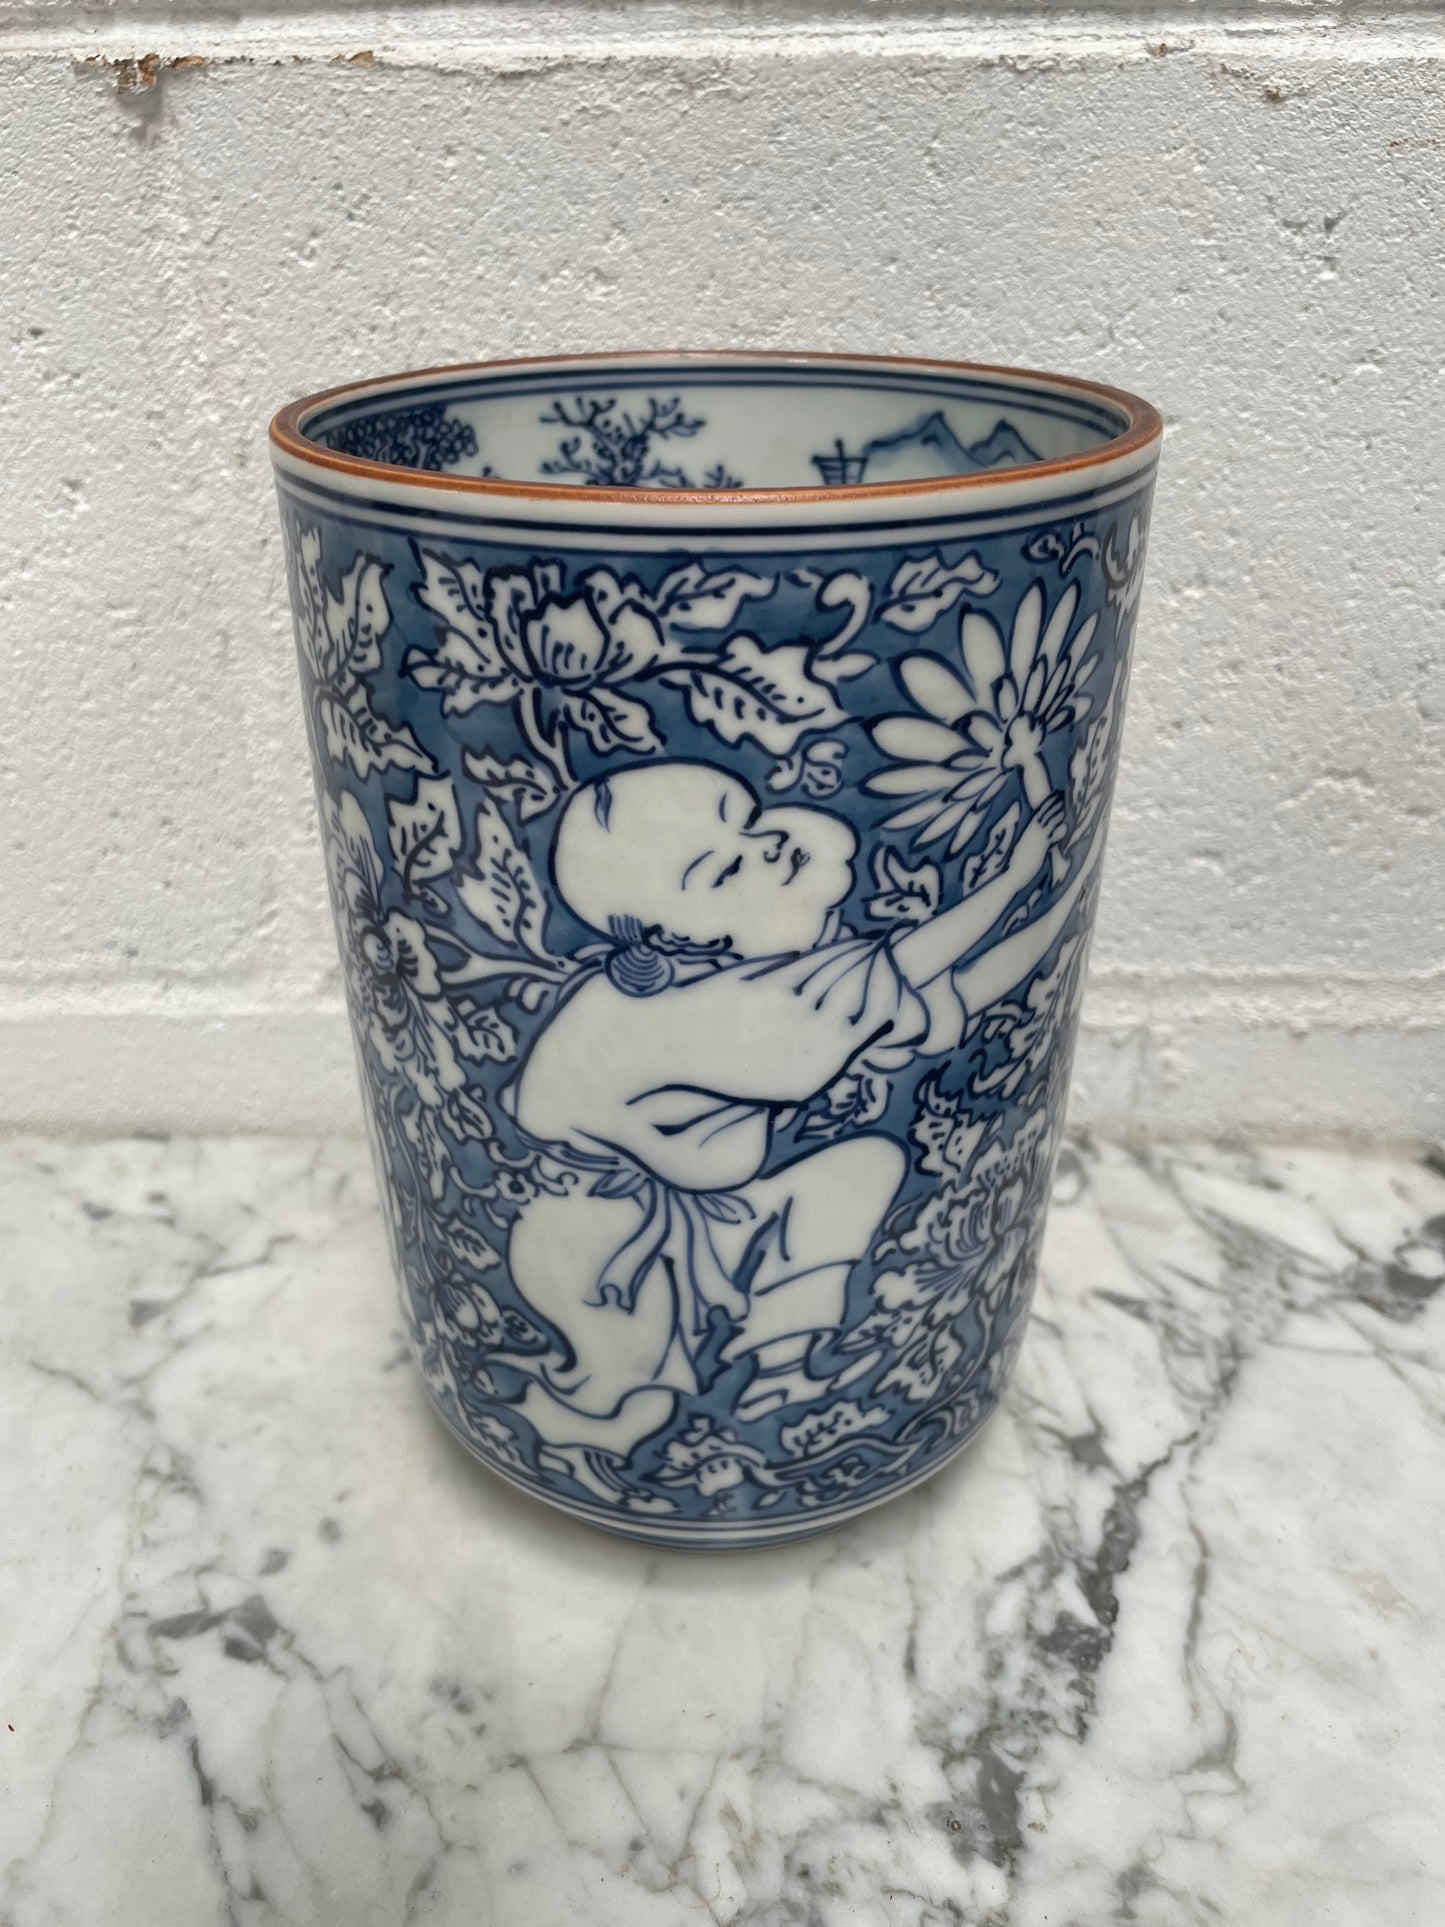 Kyoto Blue and White Pottery Vase